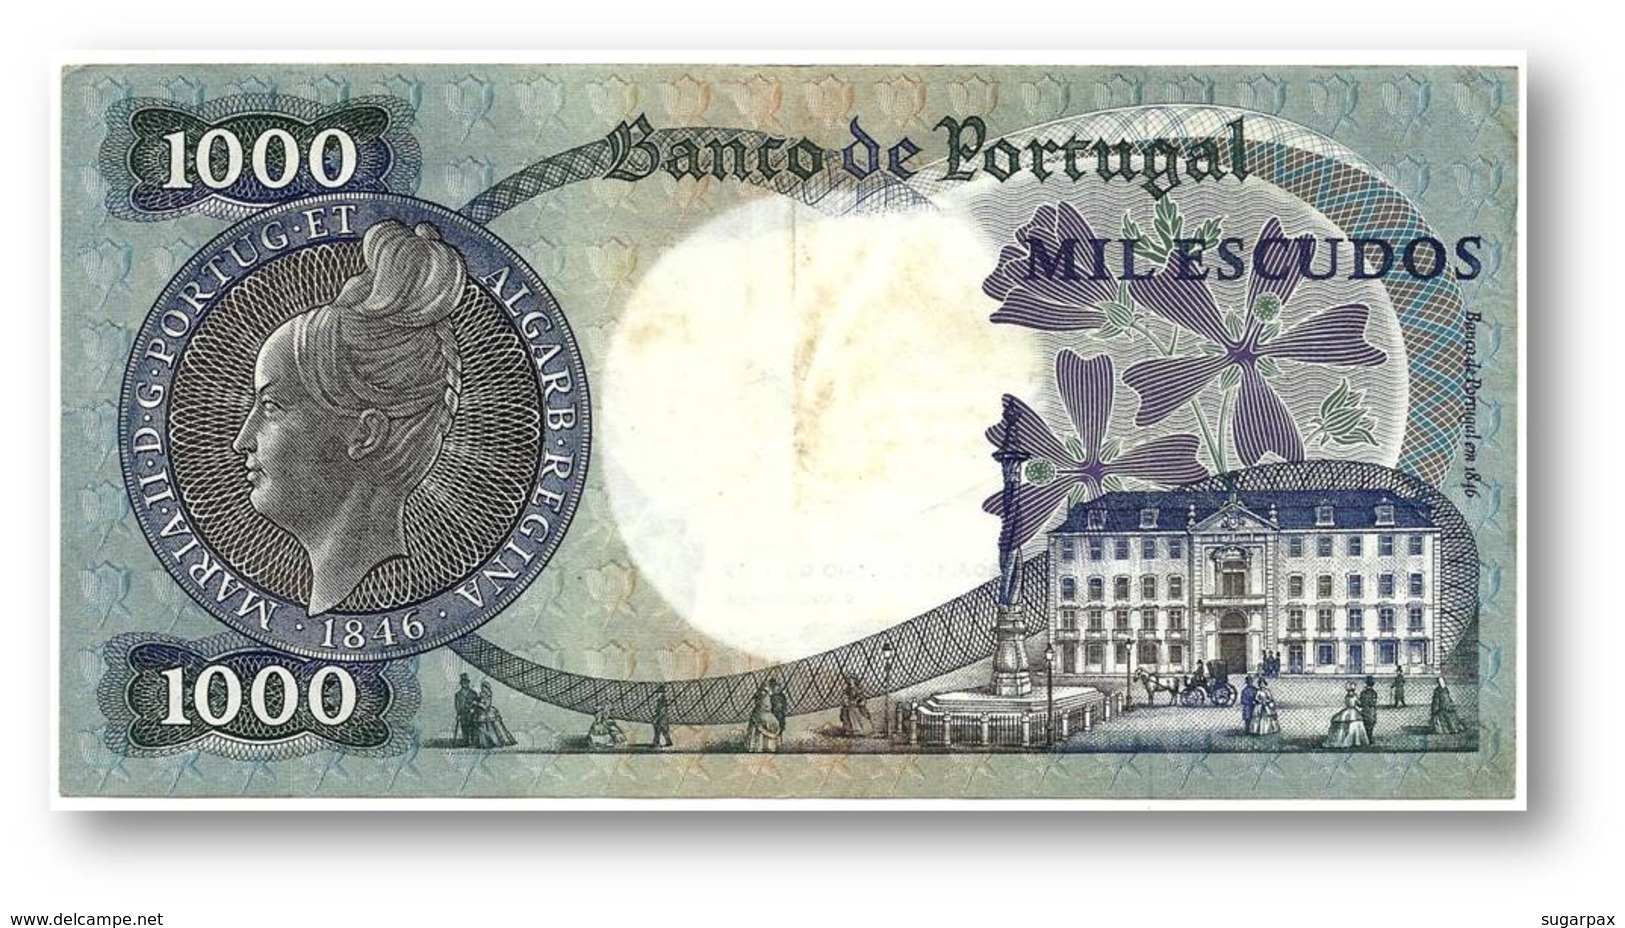 1000 Escudos - Ch. 10 - 19/05/1967 - P 172 - Sign. 3 - Serie KHS - 5 Digit Serial # - Used - D. Maria II - PORTUGAL - Portugal